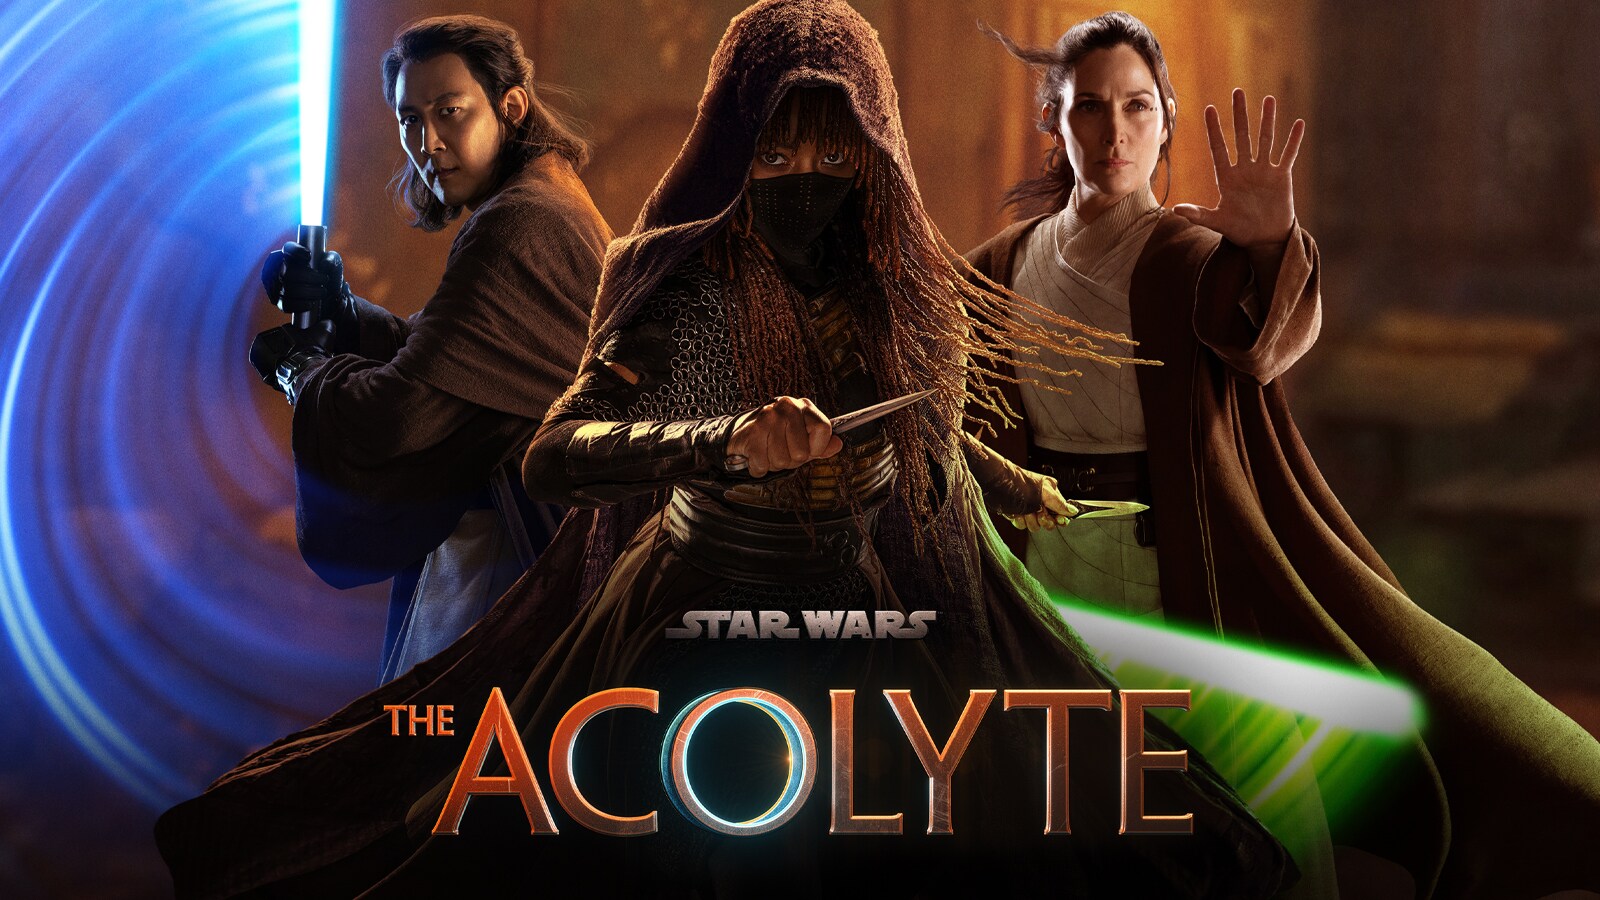 Star Wars: The Acolyte Is Here!